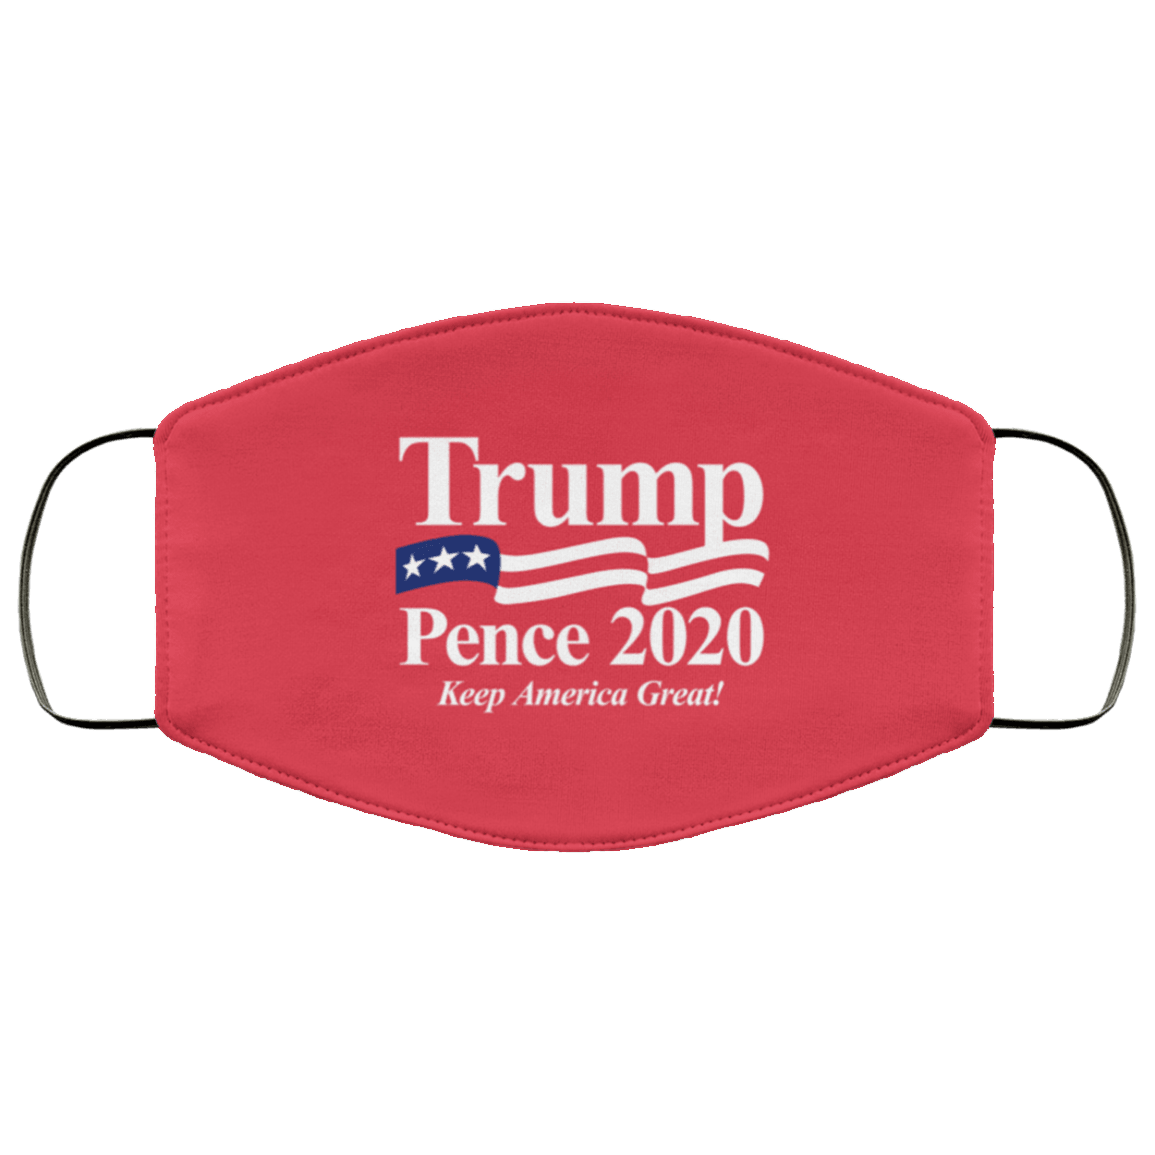 Designs by MyUtopia Shout Out:Trump Pence 2020 Adult Fabric Face Mask with Elastic Ear Loops,3 Layer Fabric Face Mask / Red / Adult,Fabric Face Mask